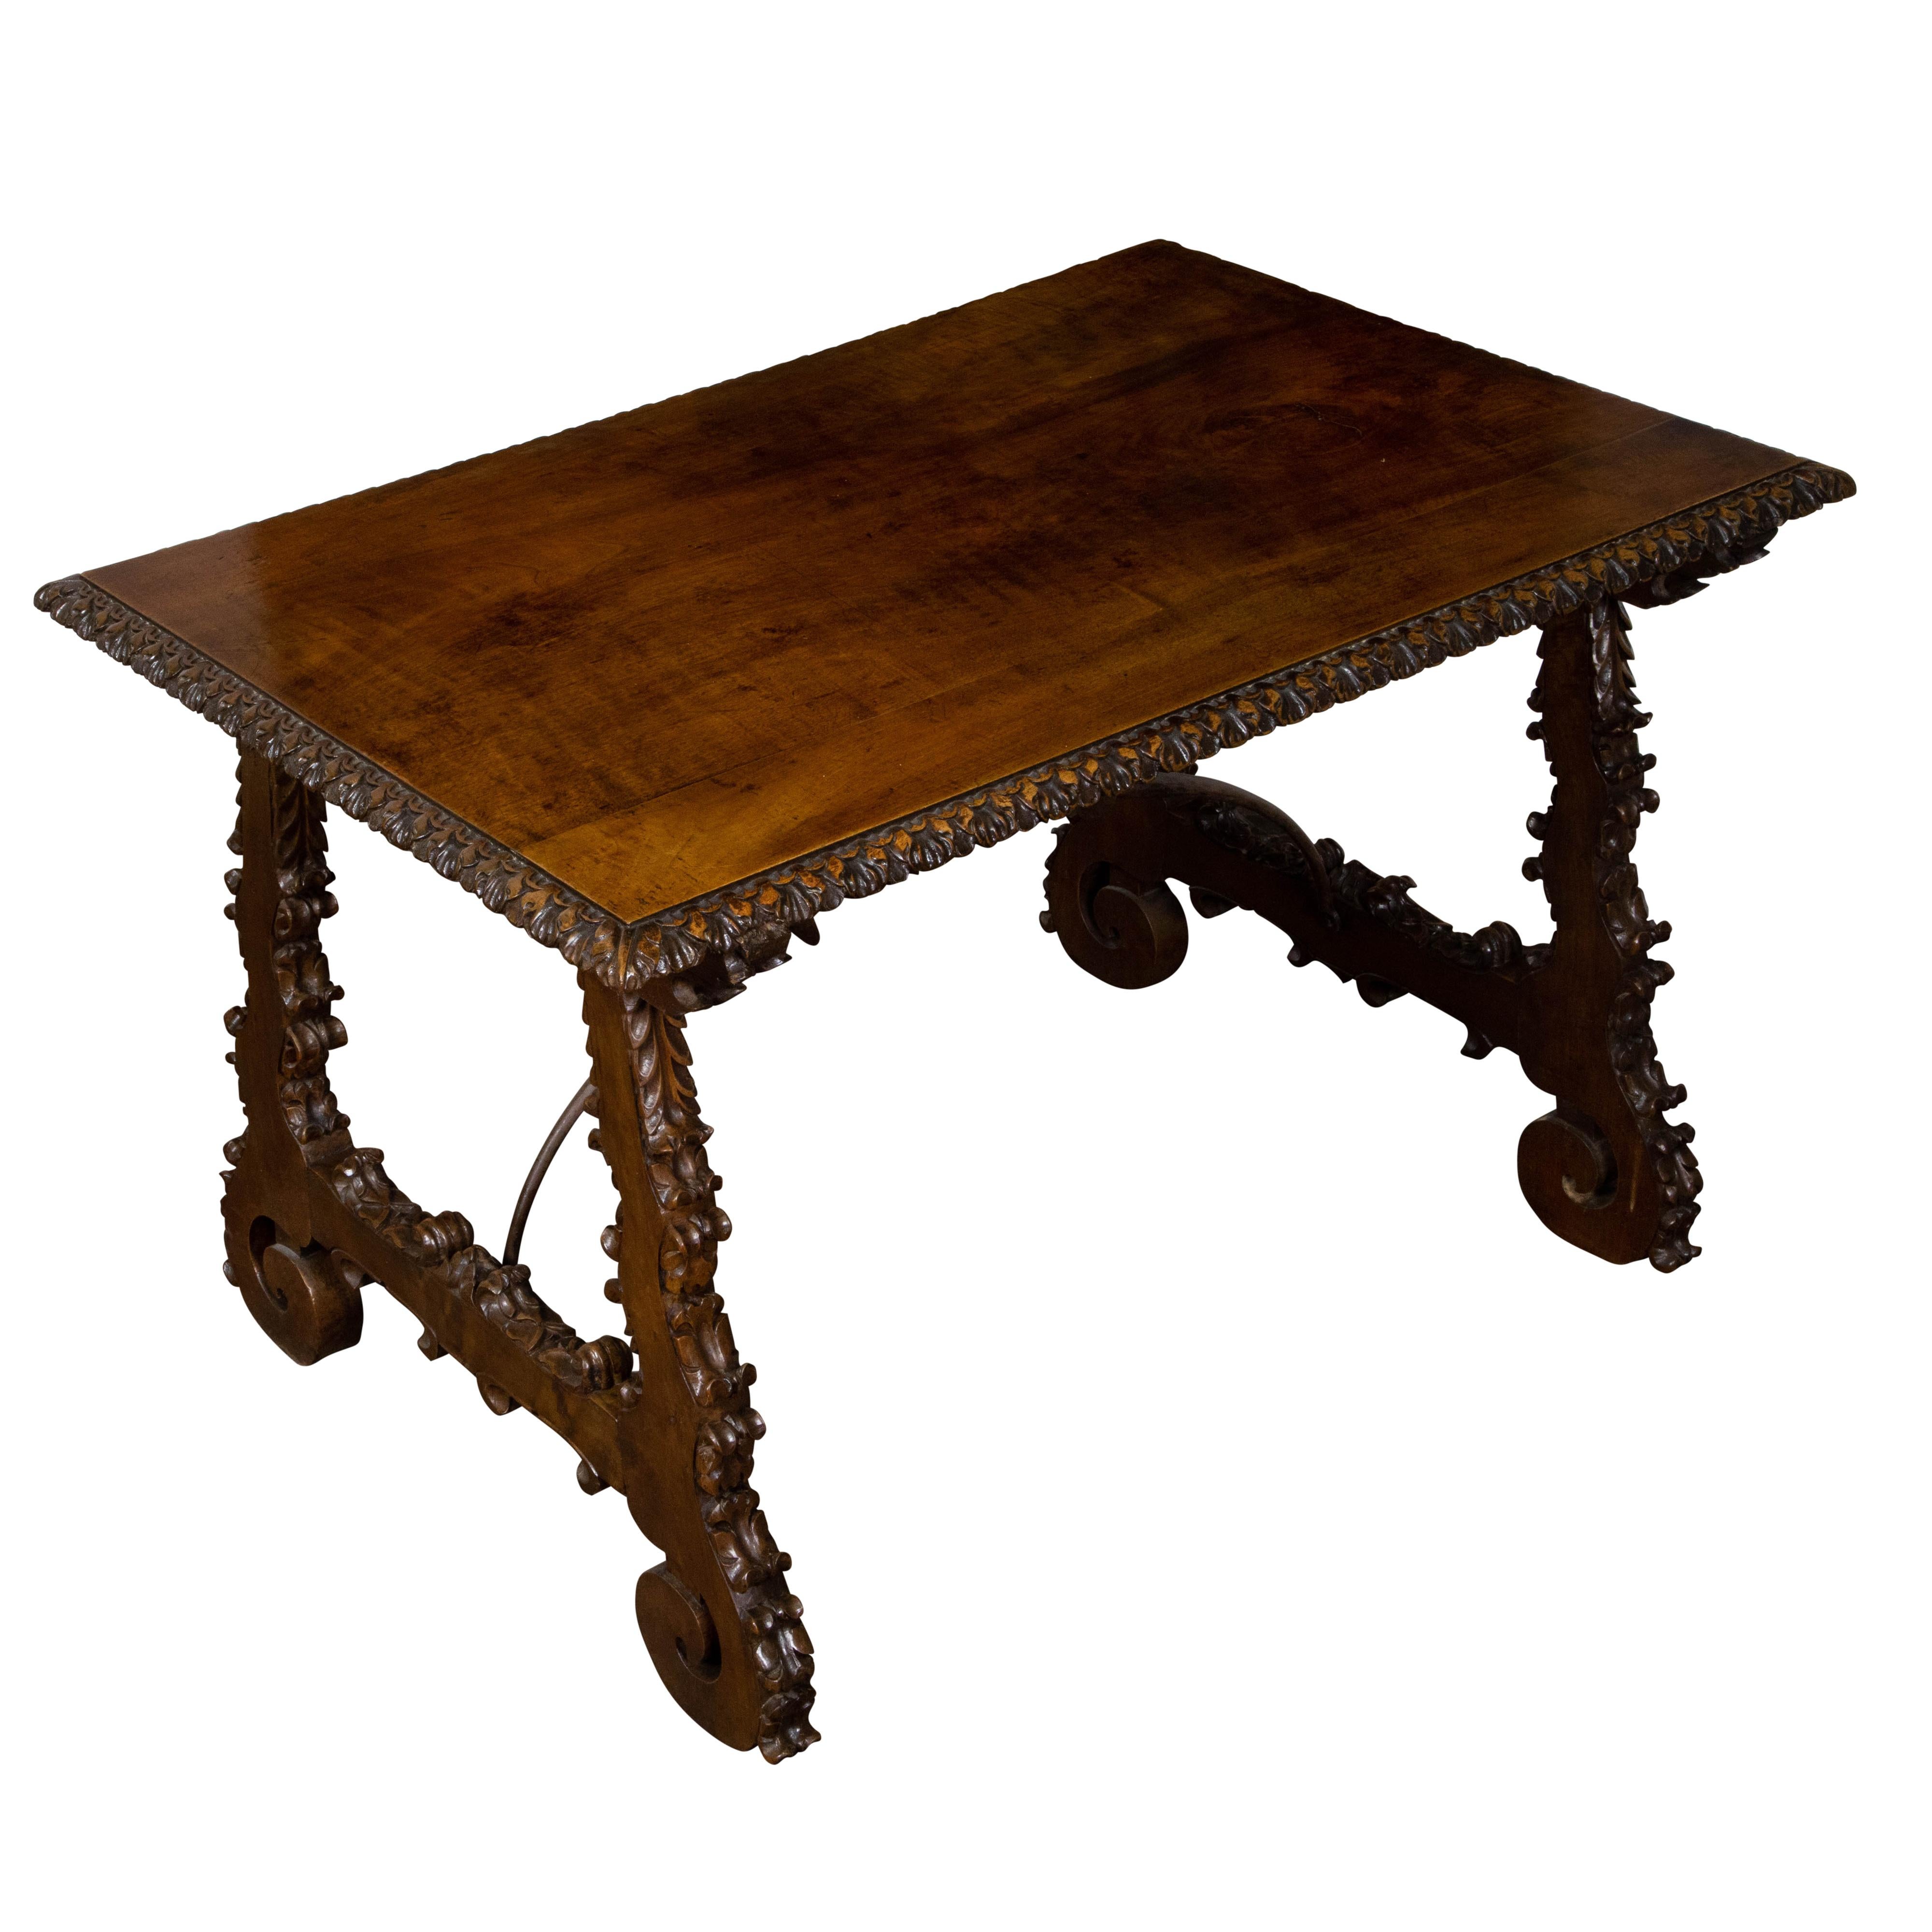 Italian 19th Century Walnut Baroque Style Fratino Table with Carved Lyre Legs For Sale 3